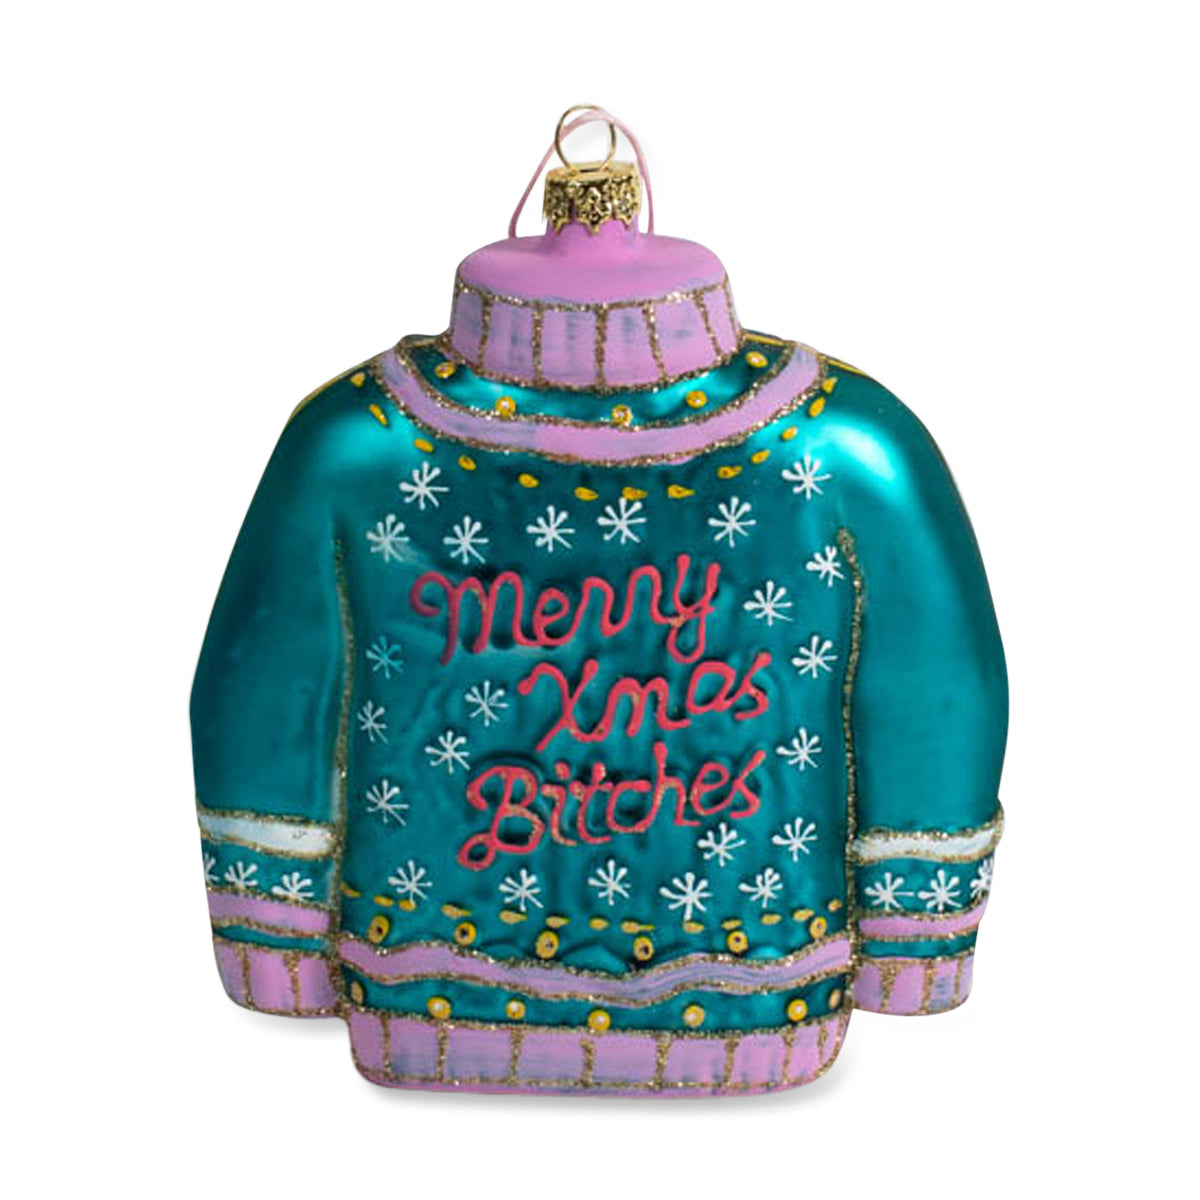 Merry Xmas Bitches Ornament - Teal